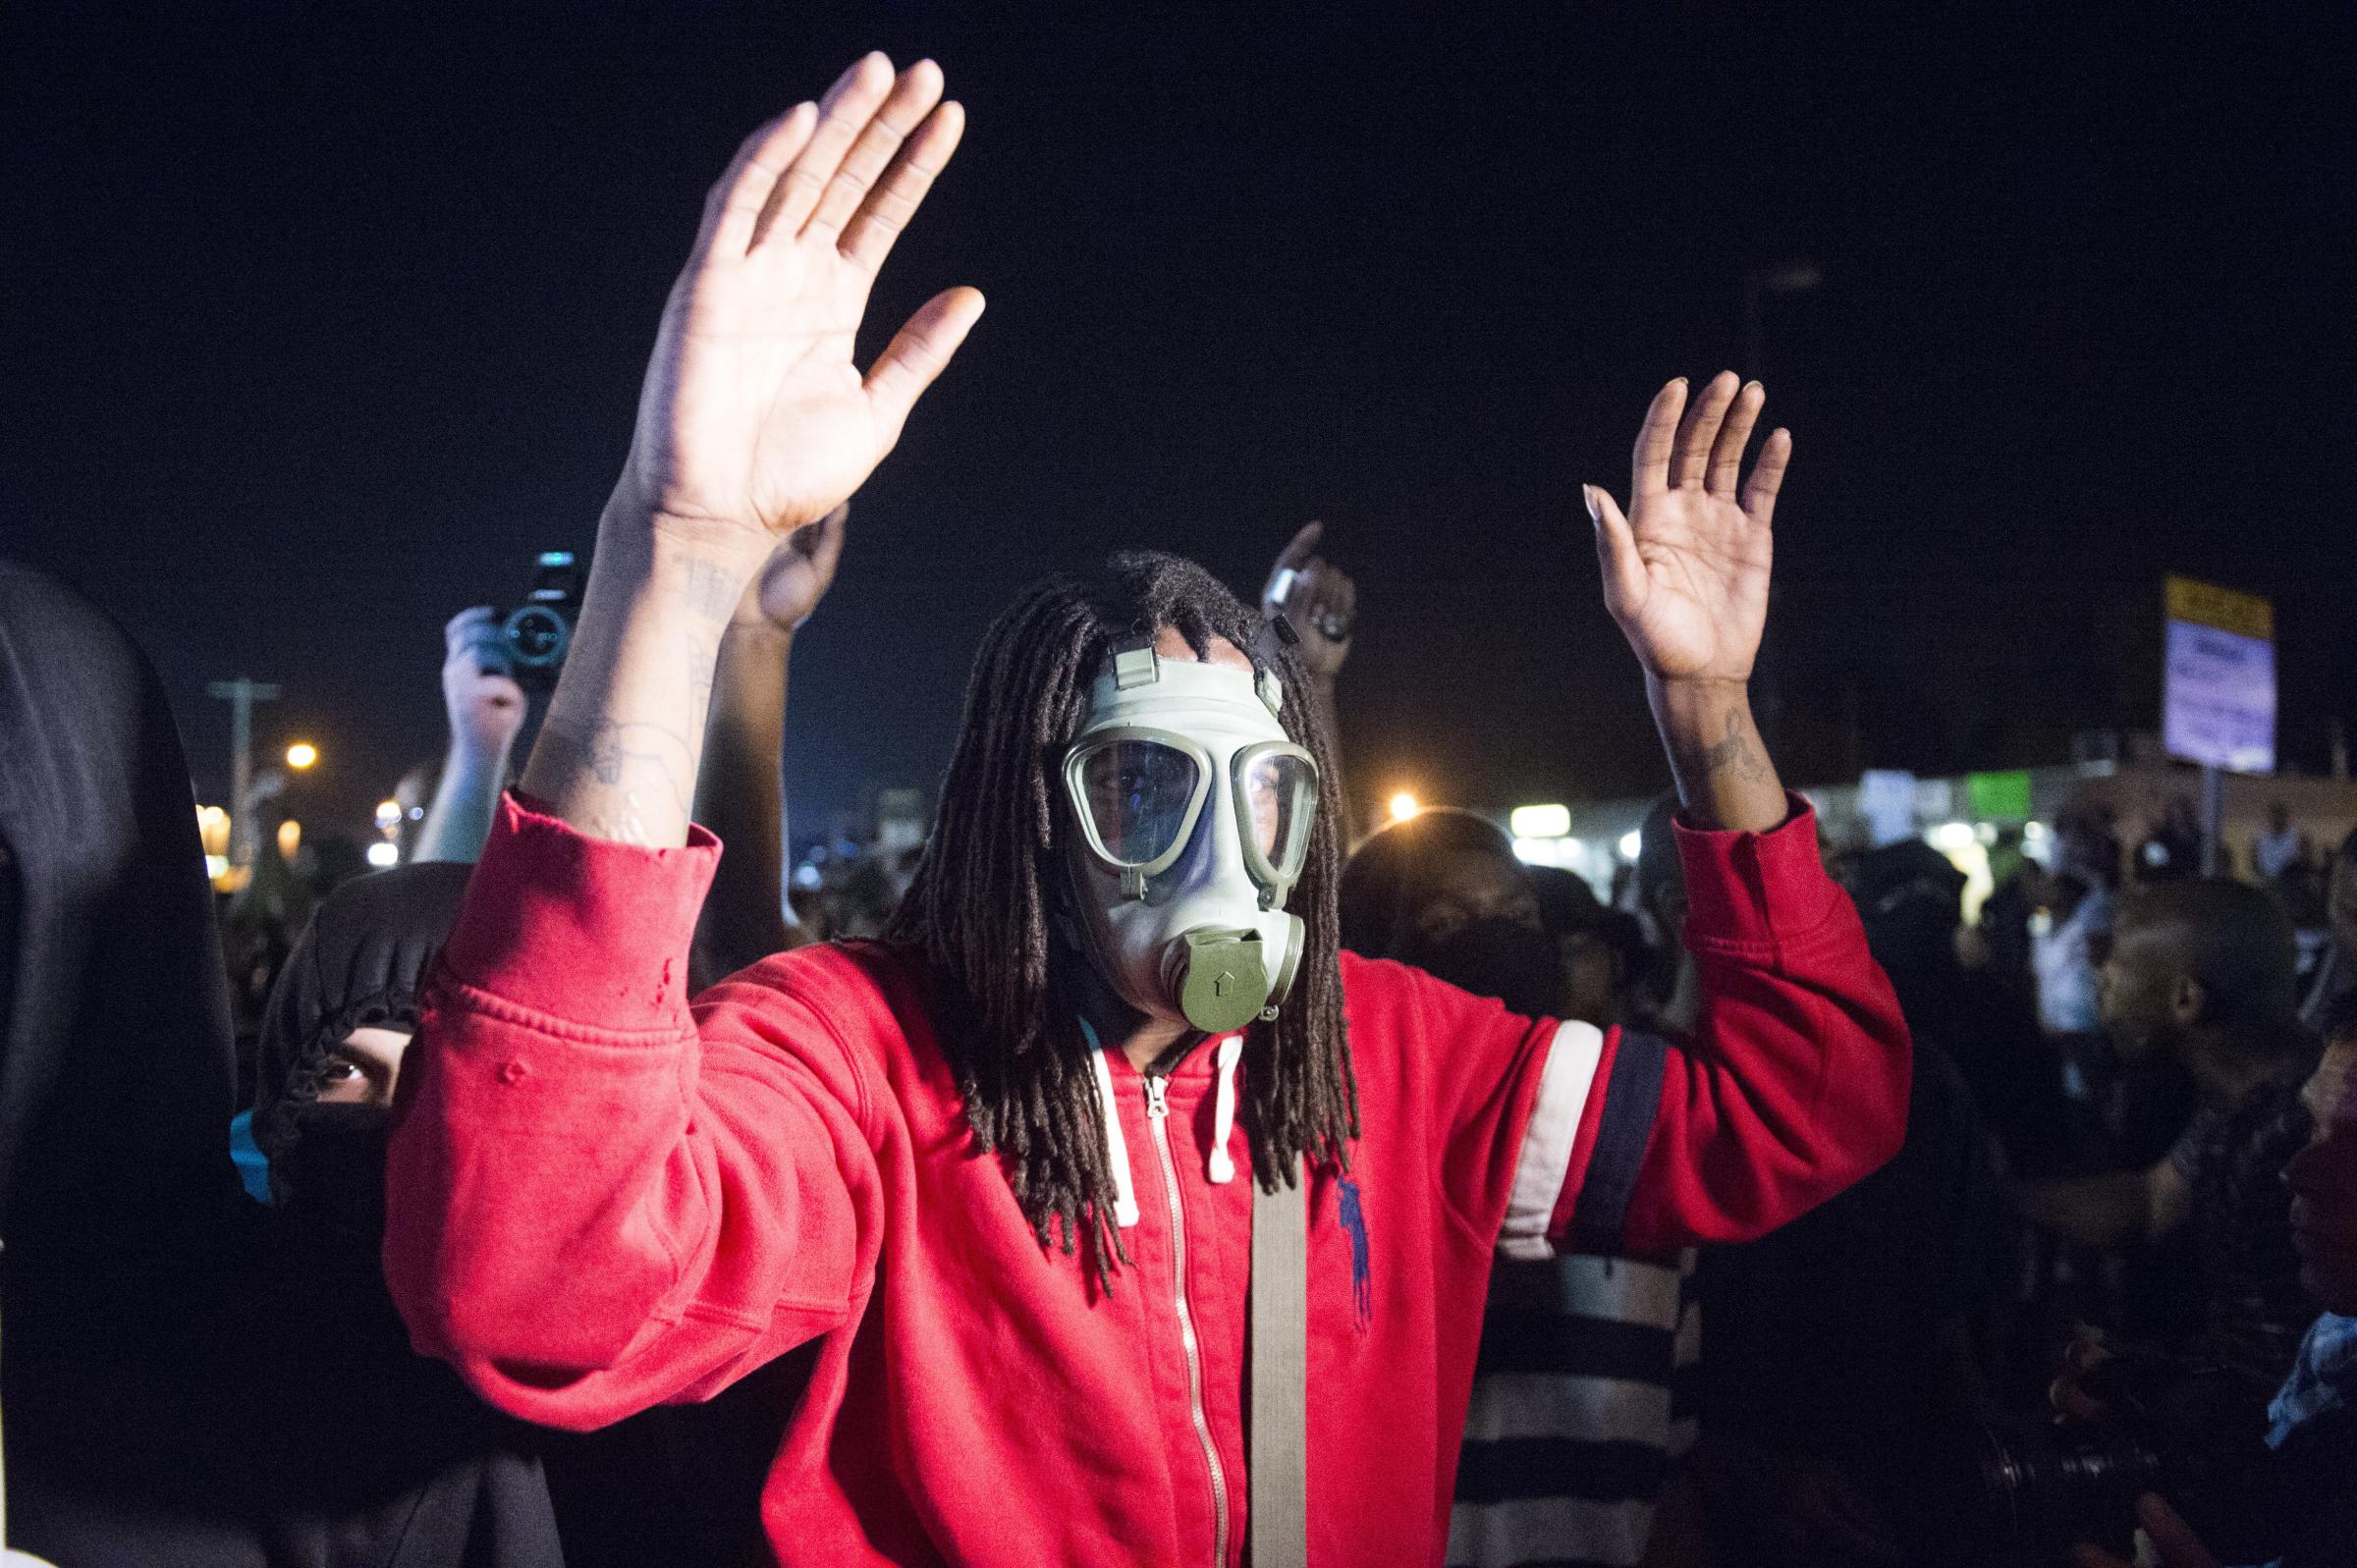 Violence between police and protestors erupts in Ferguson - again